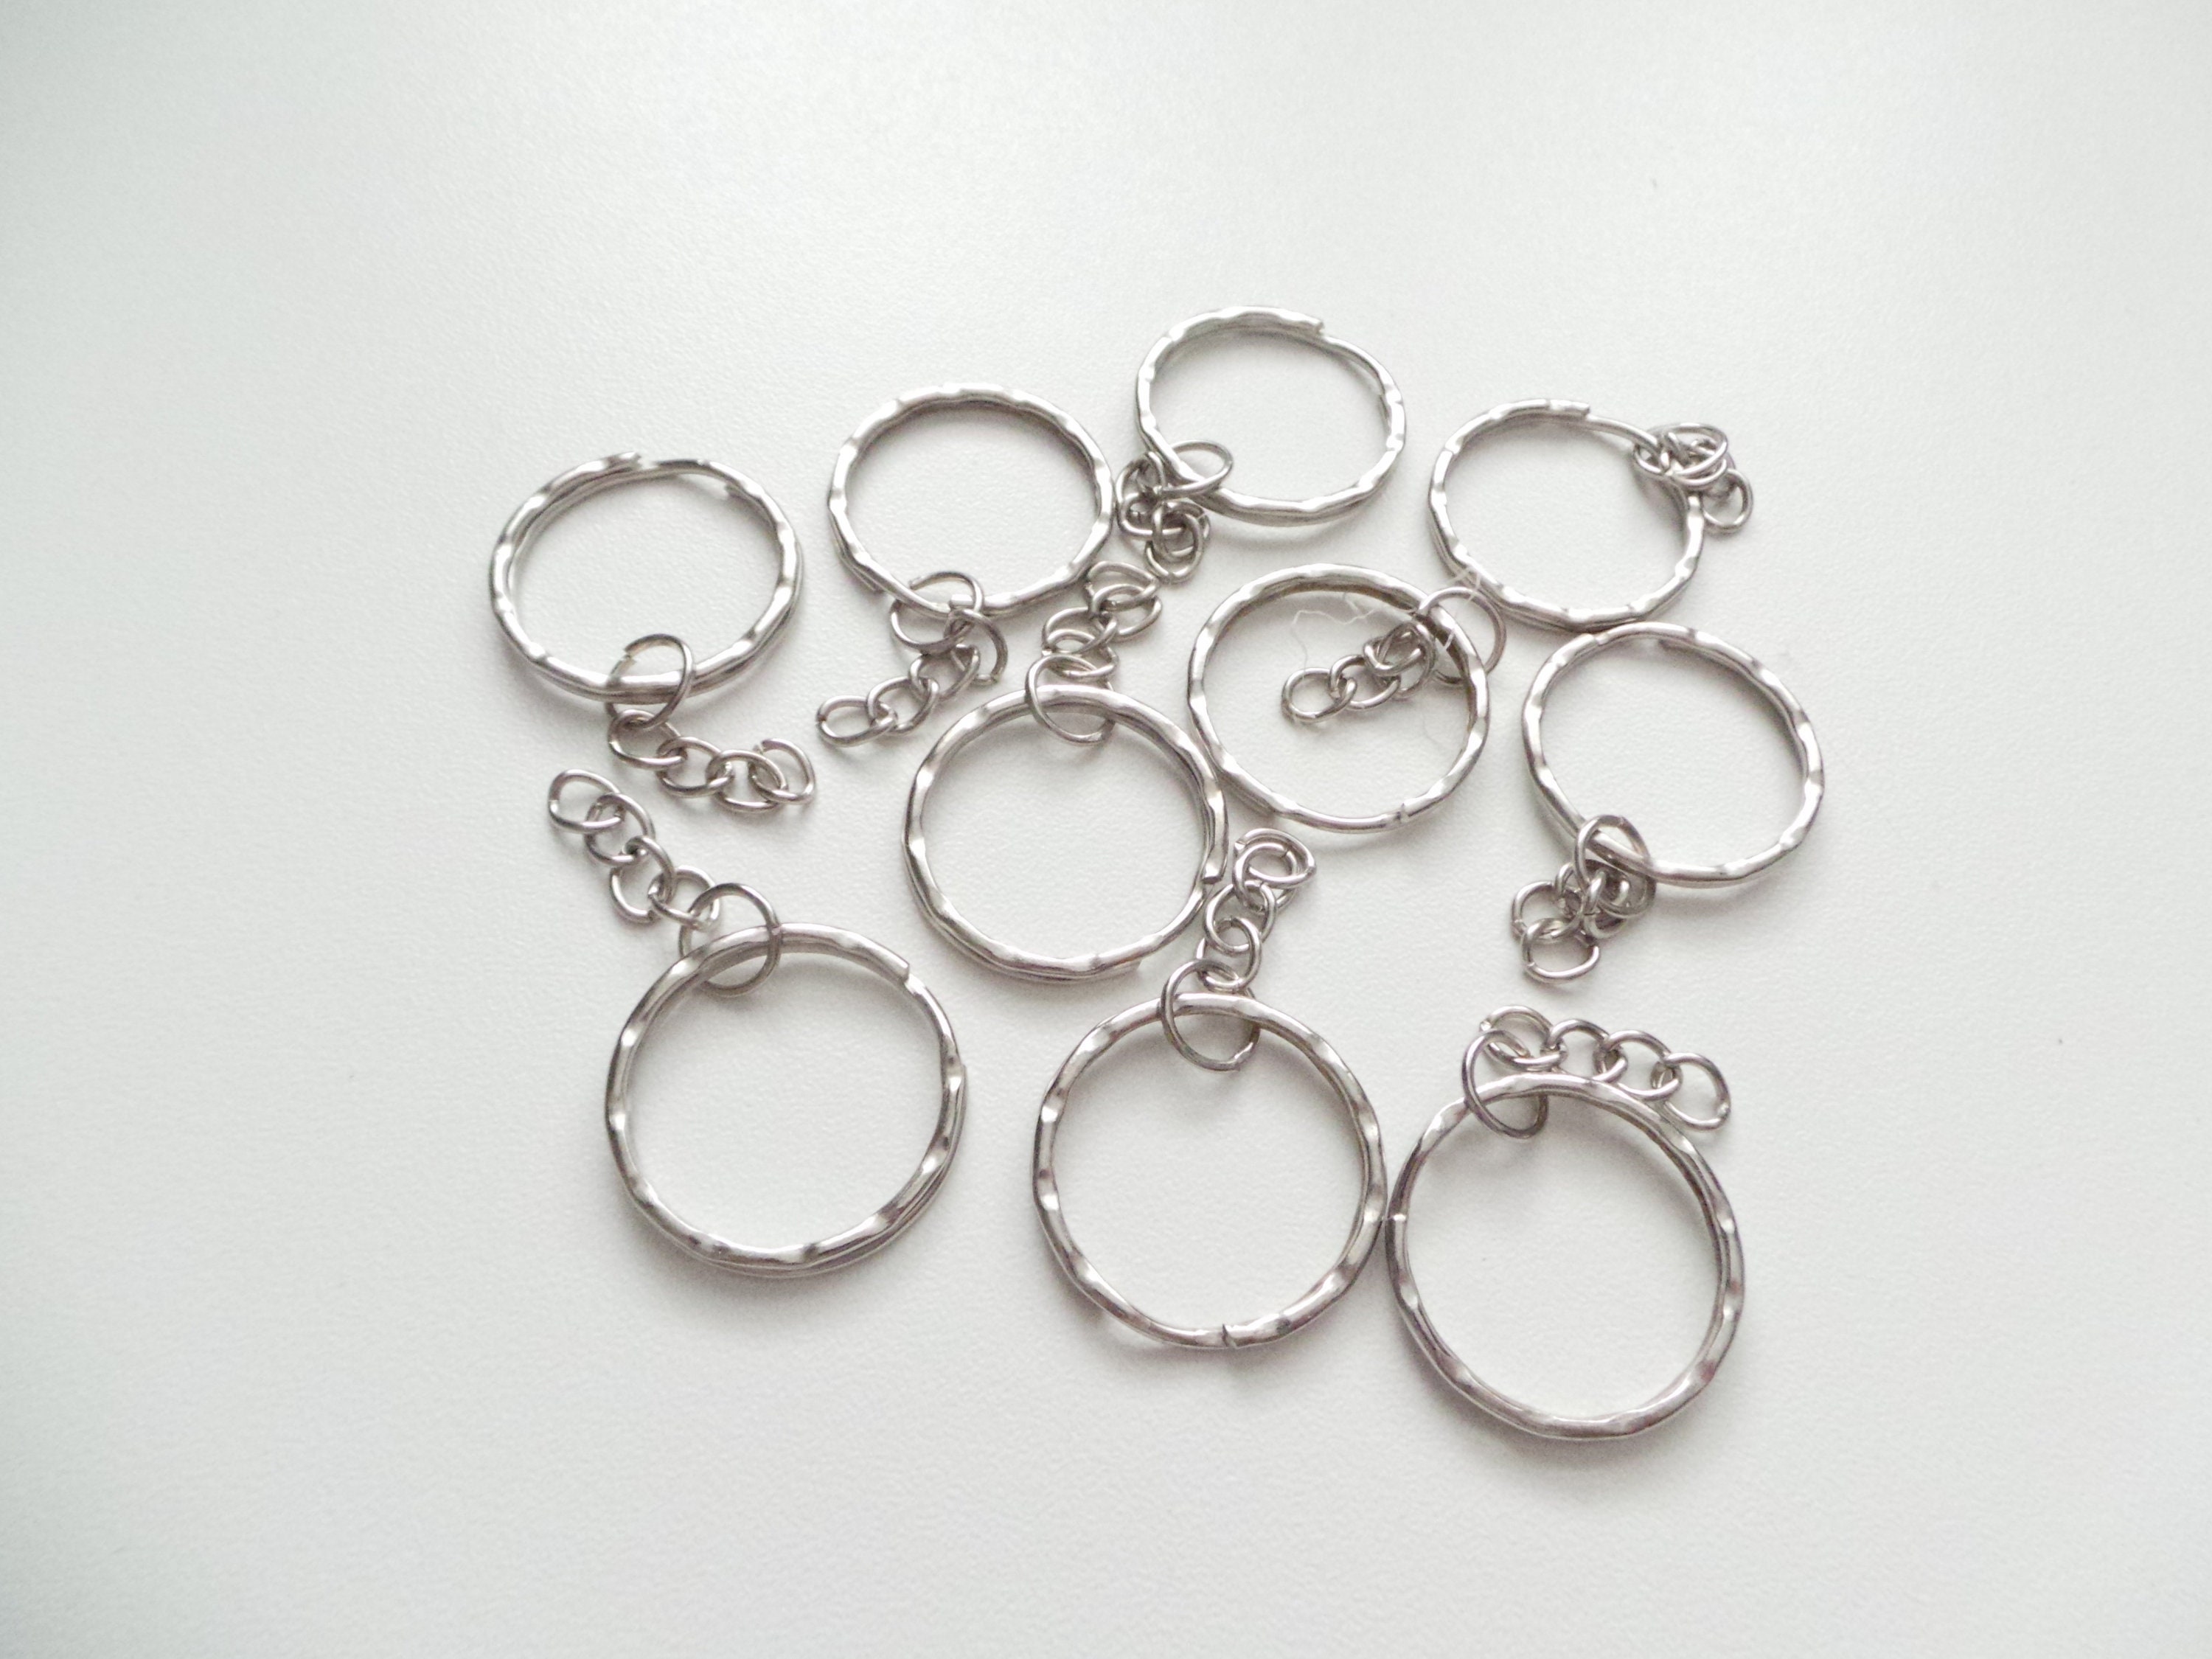 Clear Round Acrylic Blanks Keychain Set, 5/10 Keyring Chains/faux Leather  Tassels, Transparent Discs/circles 